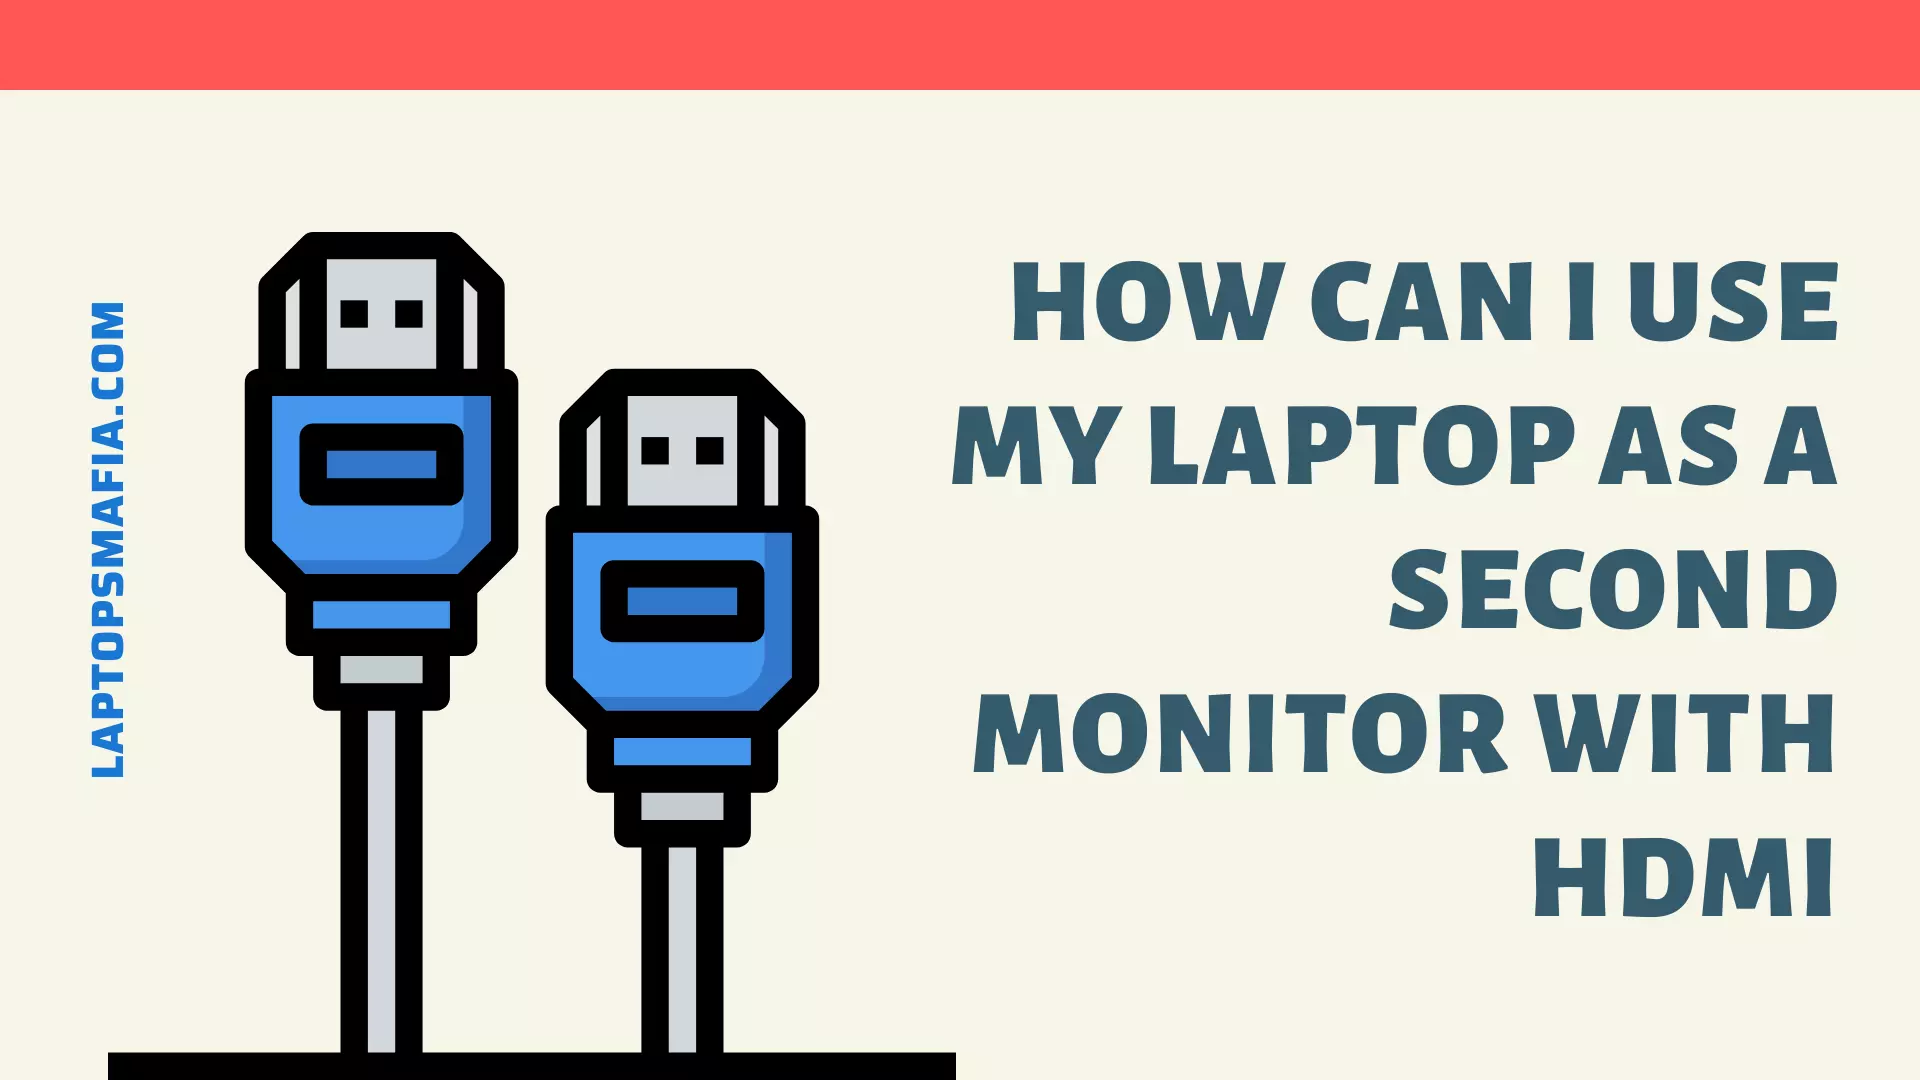 How Can I Use My Laptop as a Second Monitor with HDMI